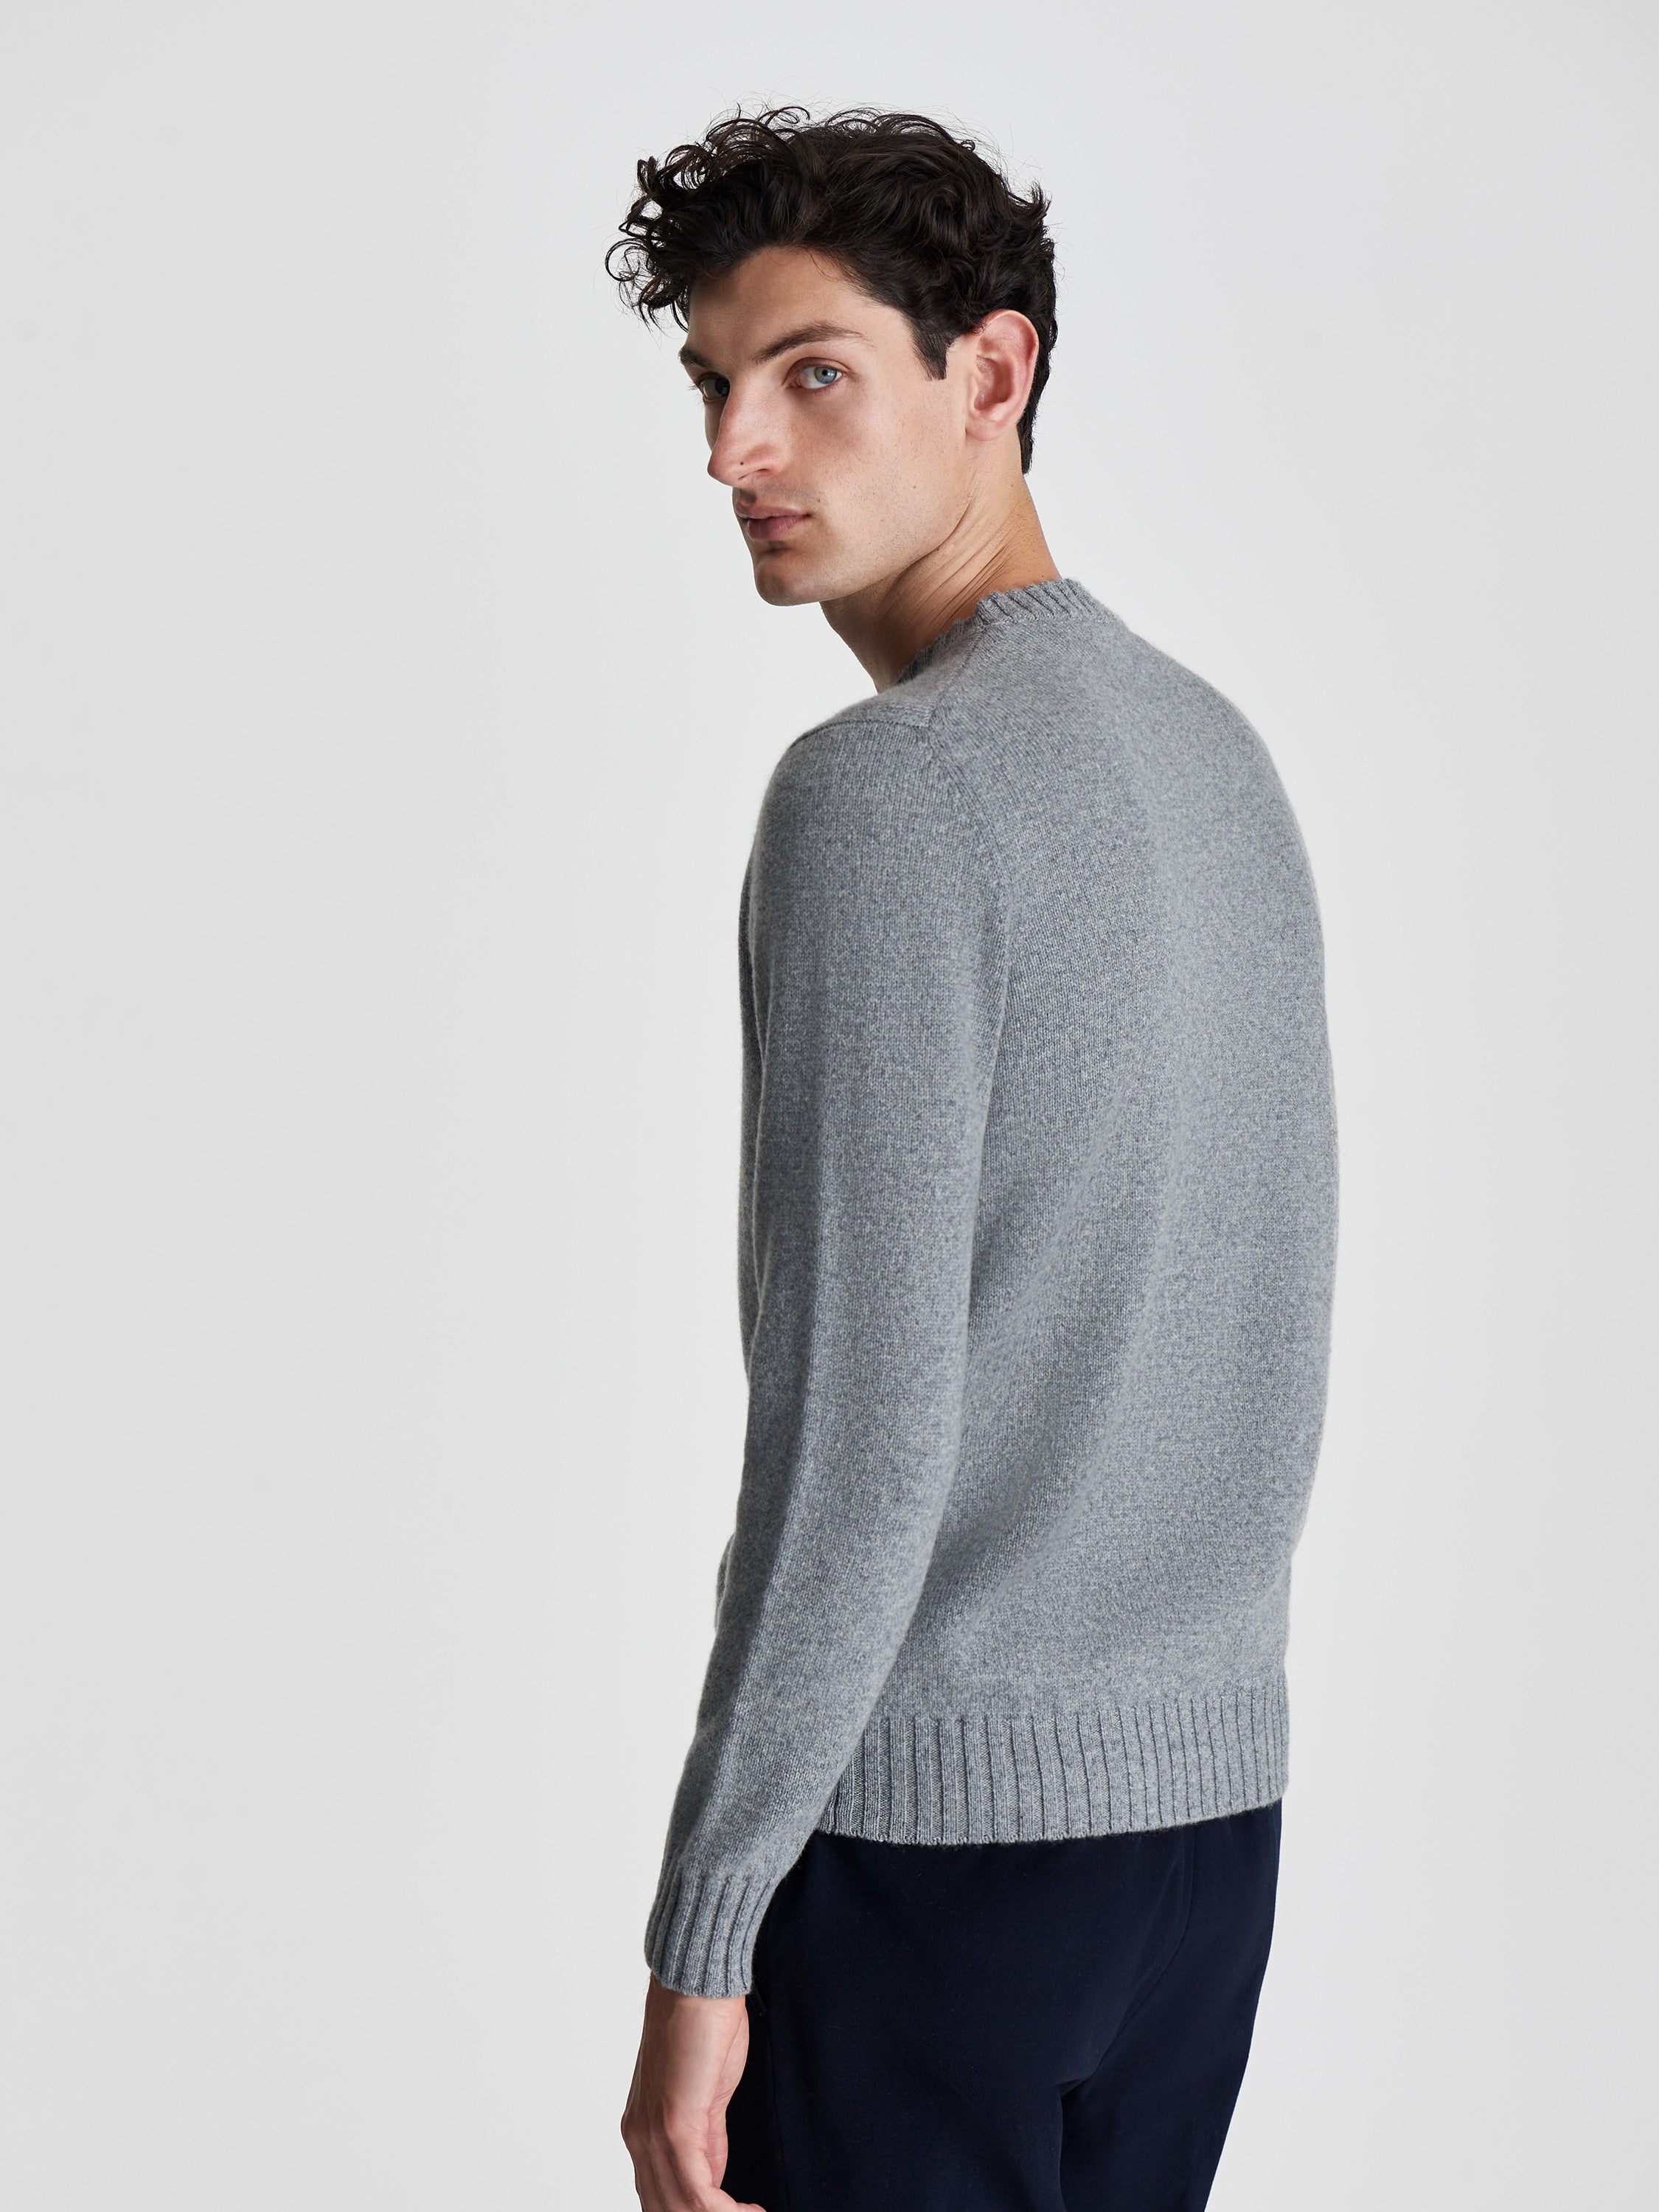 Cashmere Crew Neck Sweater Grey Cropped Model Image